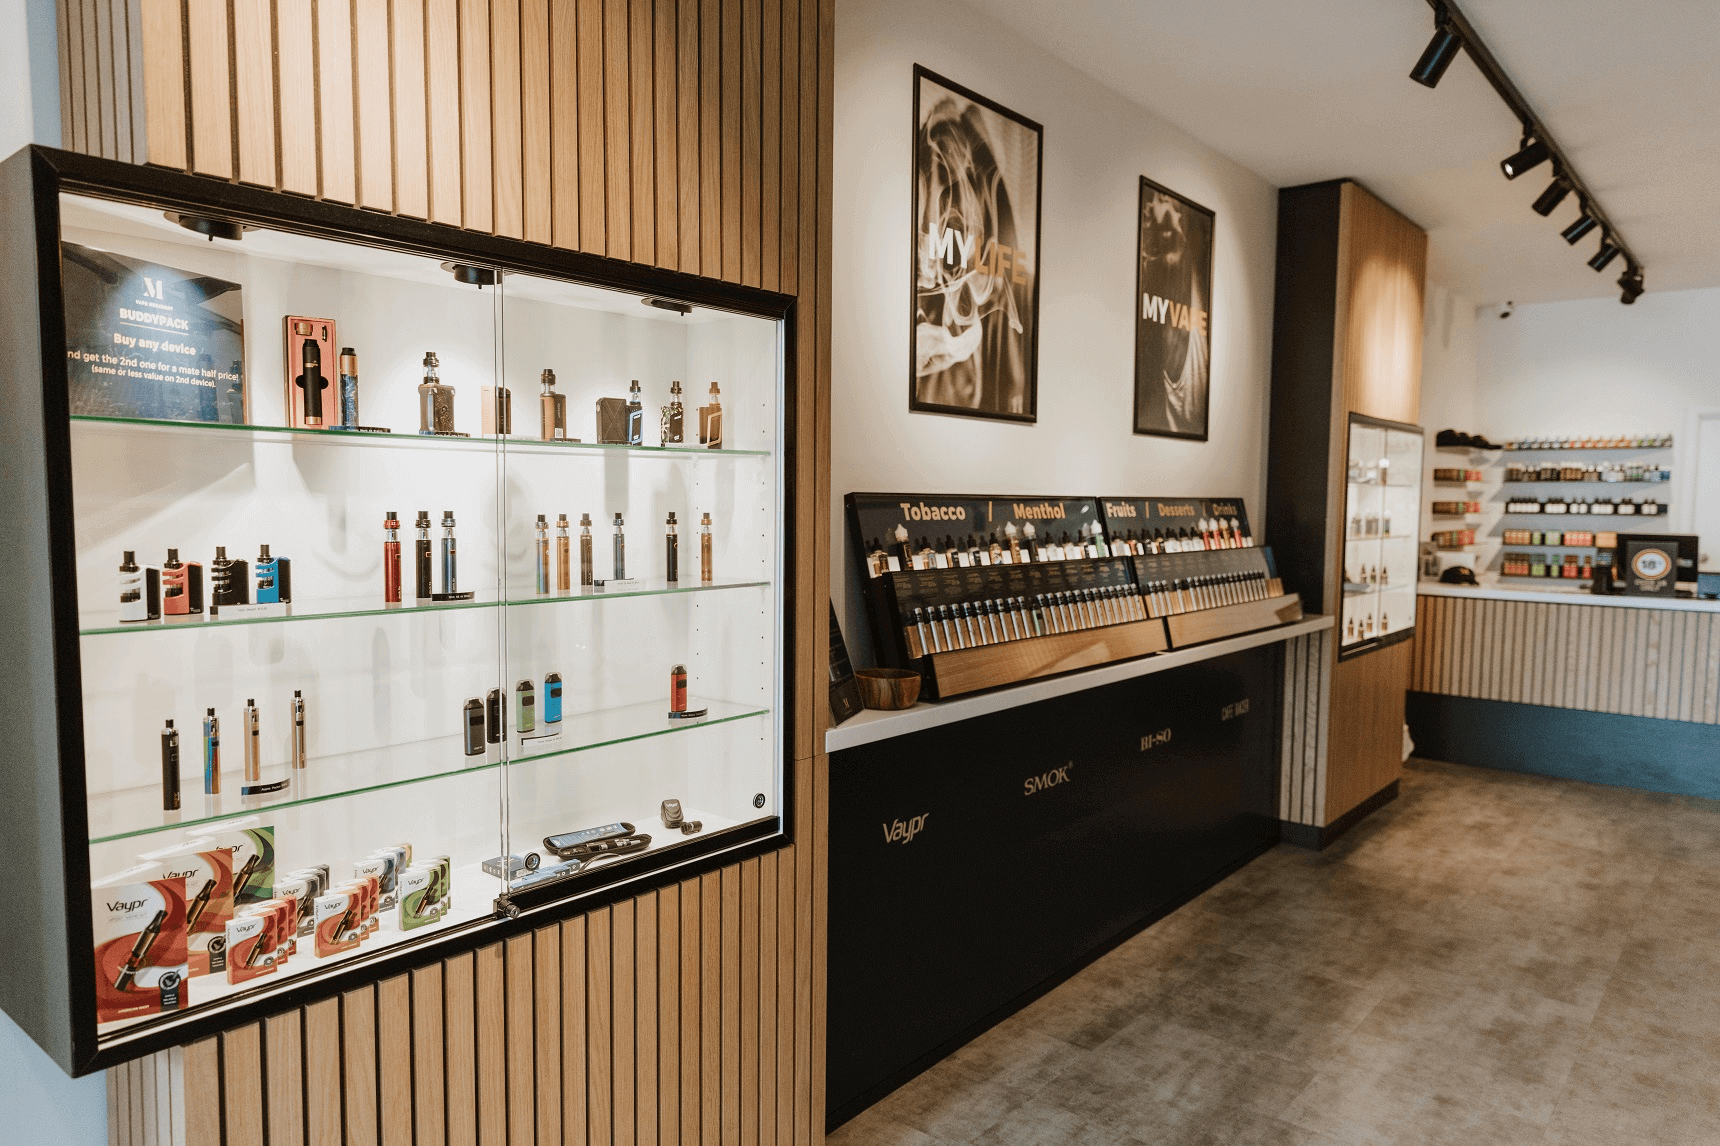 Vape Shop – What Are The Services And How To Open A New Vape Shop 39992 - Vape Shop – What Are The Services And How To Open A New Vape Shop?